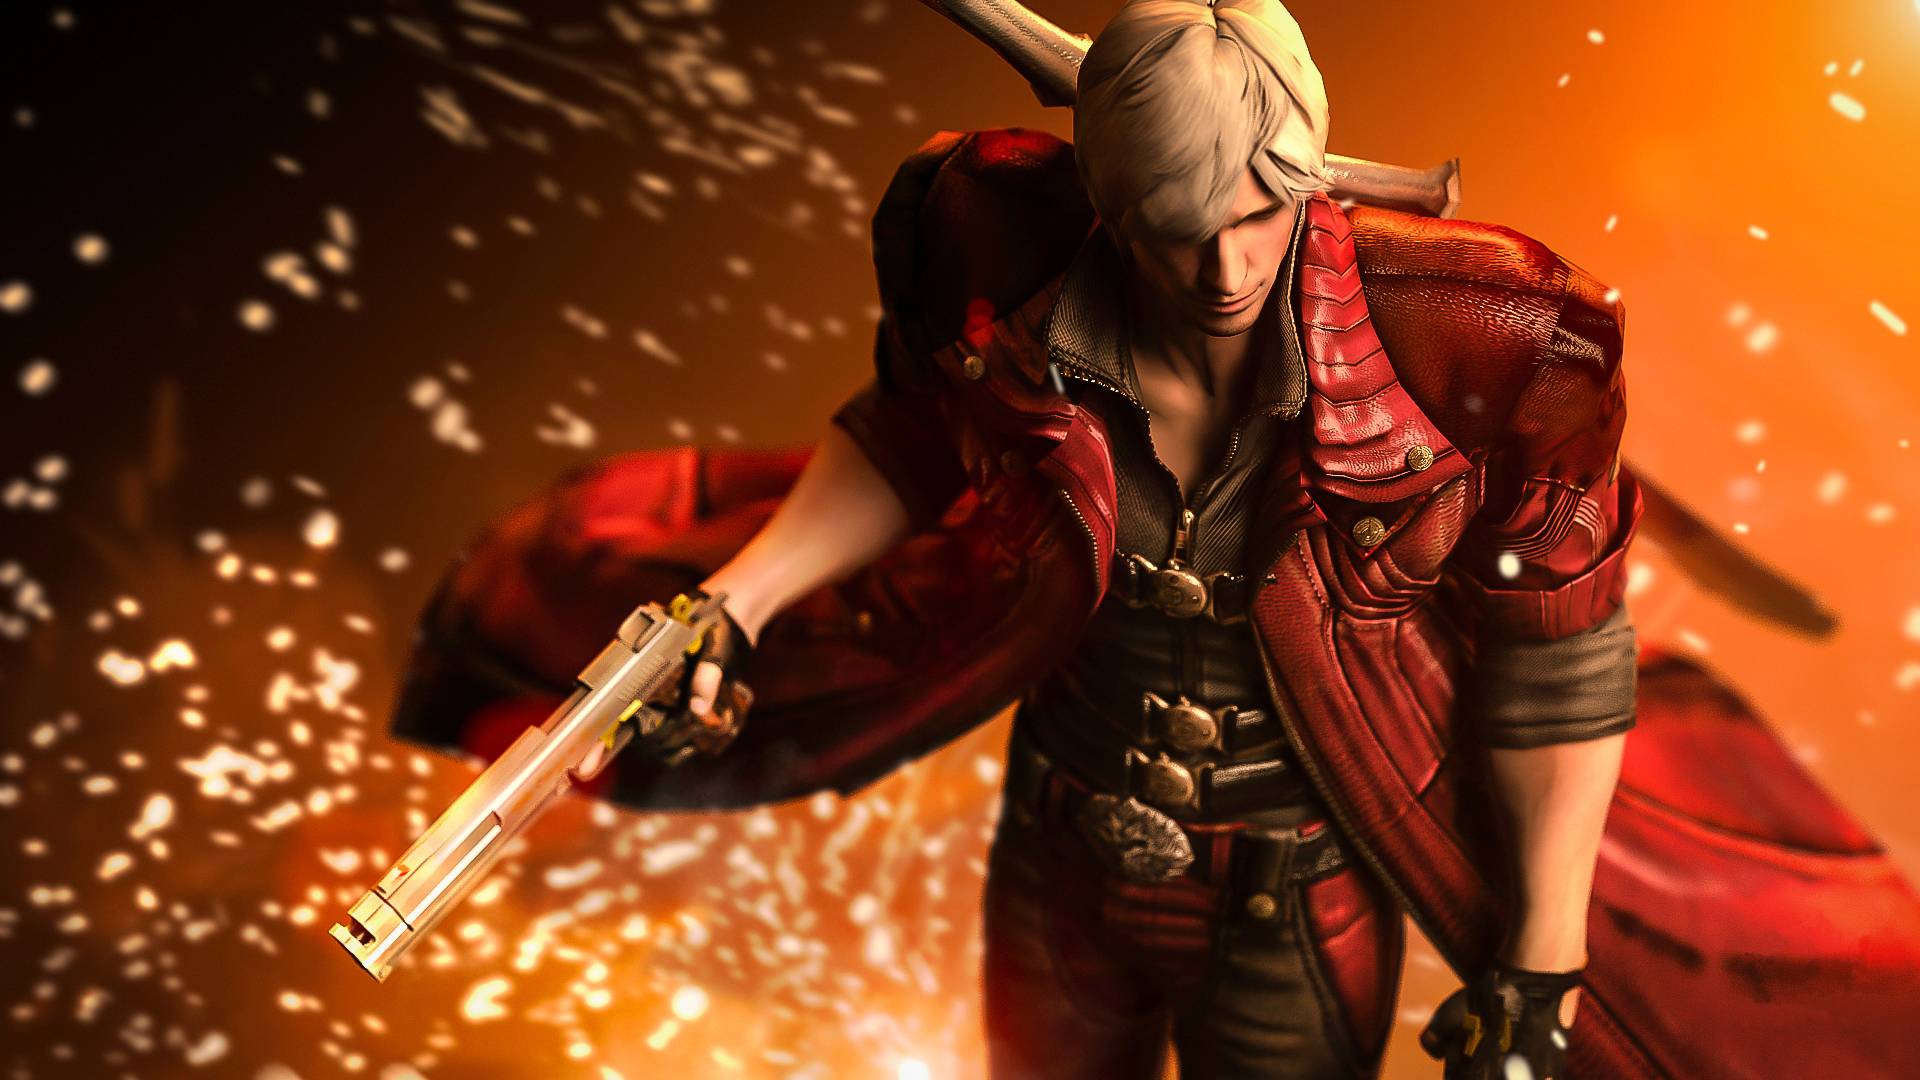 New Dante Devil May Cry 4 Wallpaper HD for Desktop Background 1920x1080